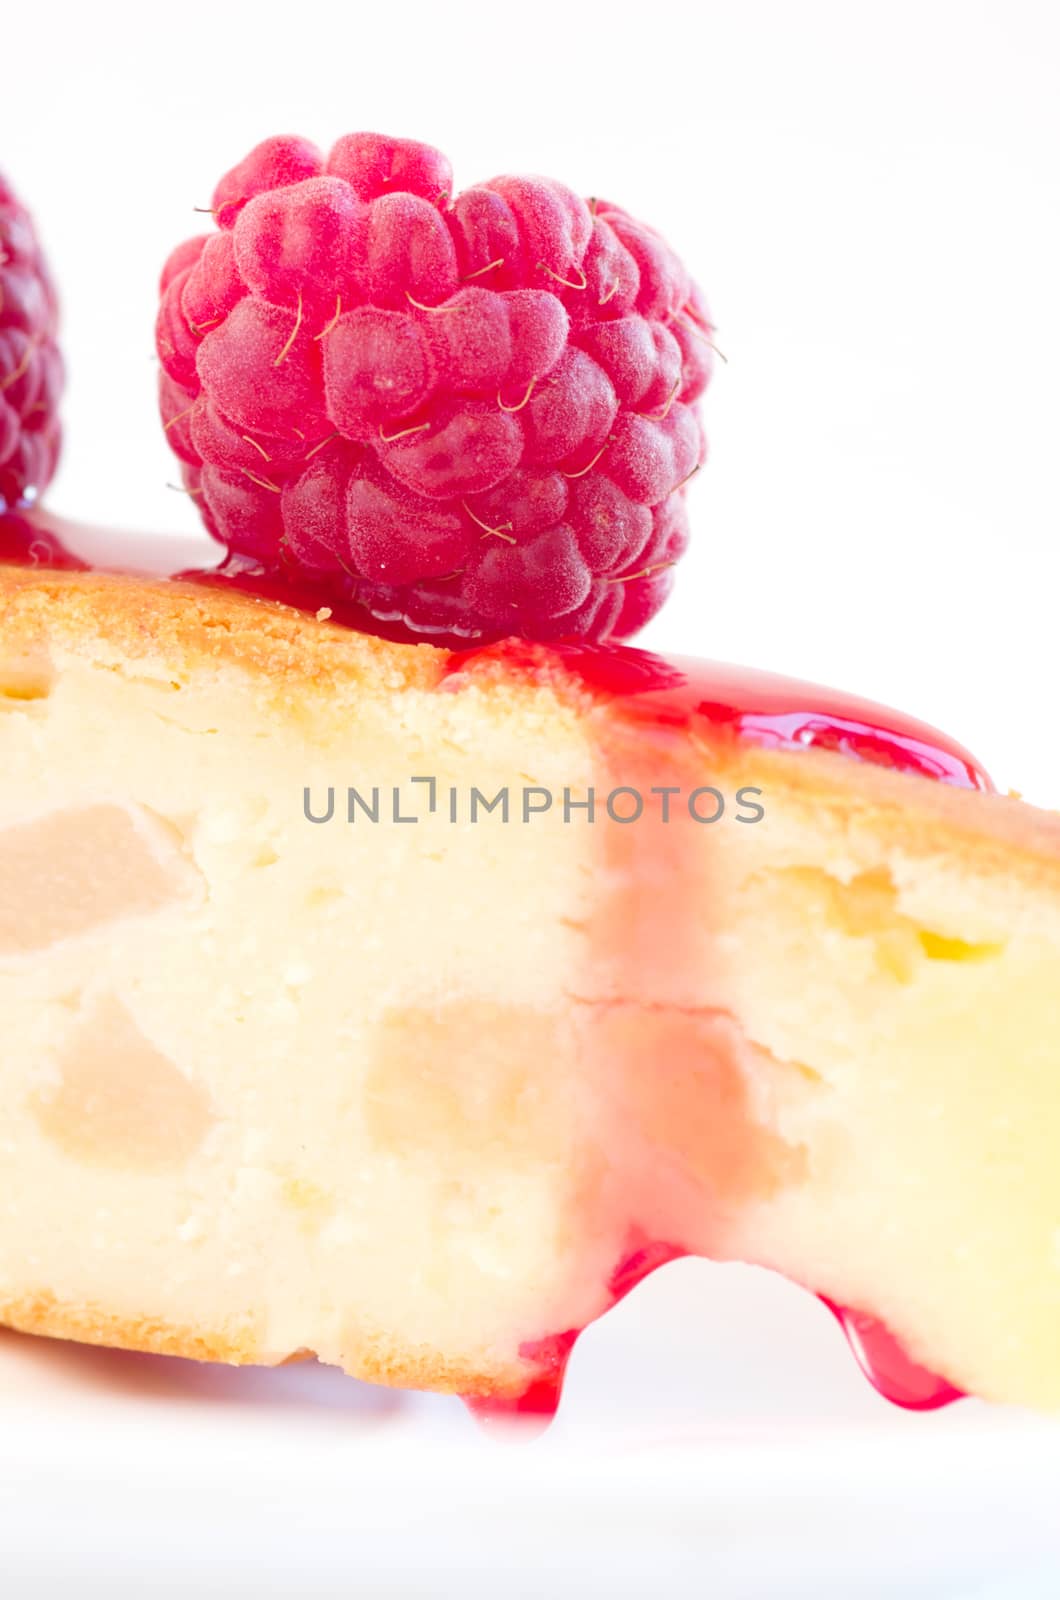 cake with raspberries and cream cheese decorated with fresh rasp by dolnikow